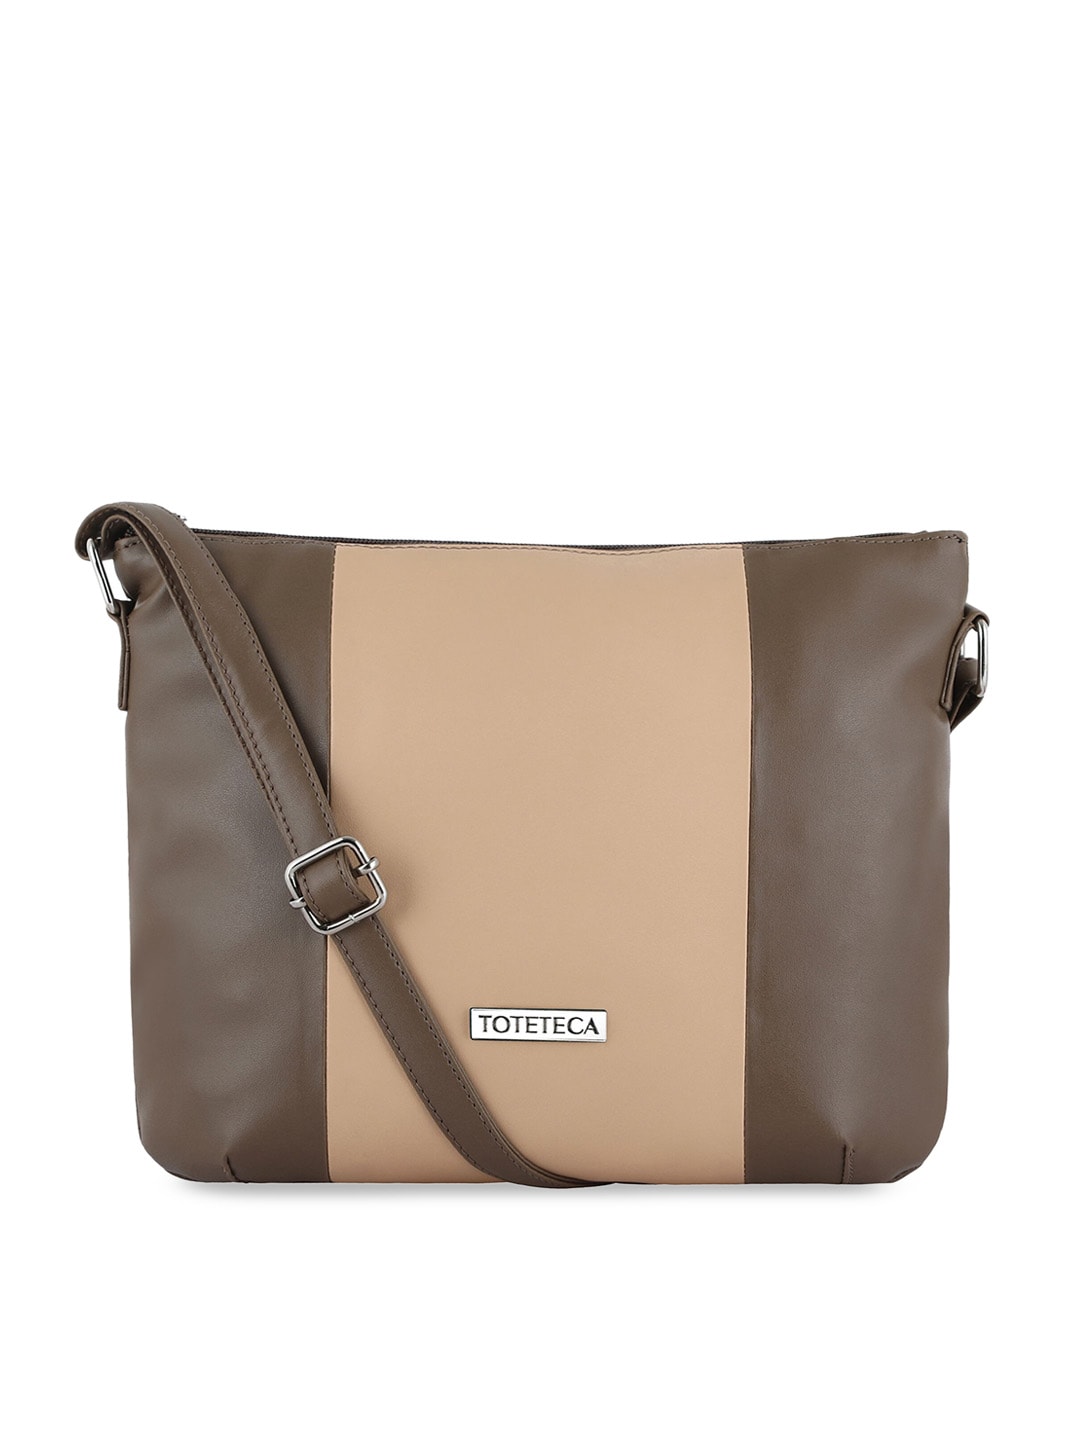 Toteteca Beige Colourblocked PU Structured Sling Bag with Tasselled Price in India